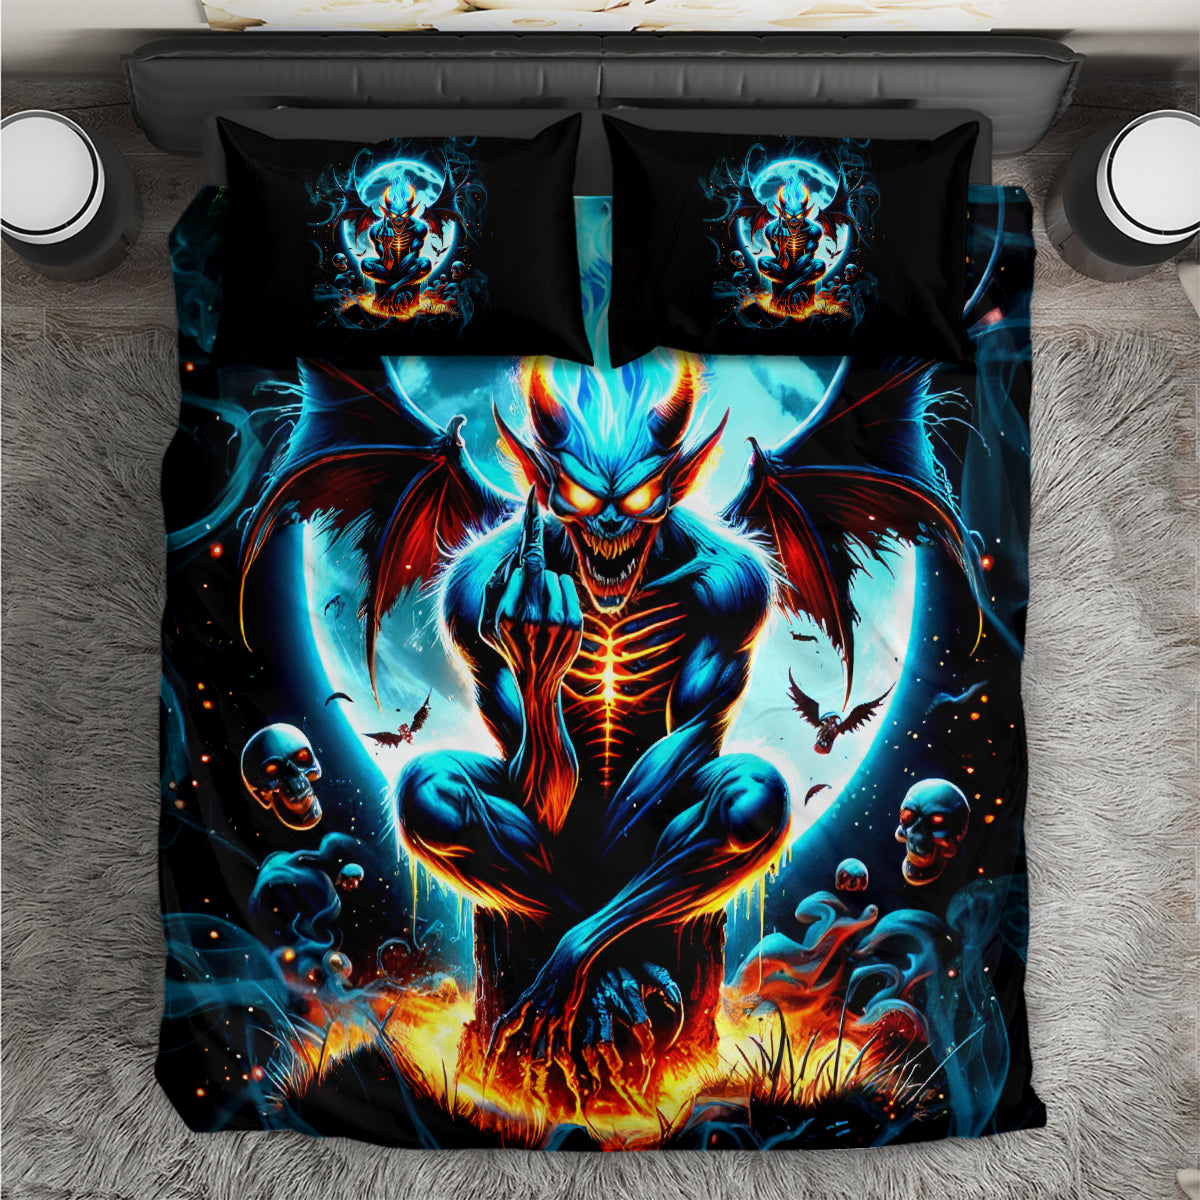 Devil Skull Bedding Set One Day I'm Gonna Just Say And Let My Demons Out Play